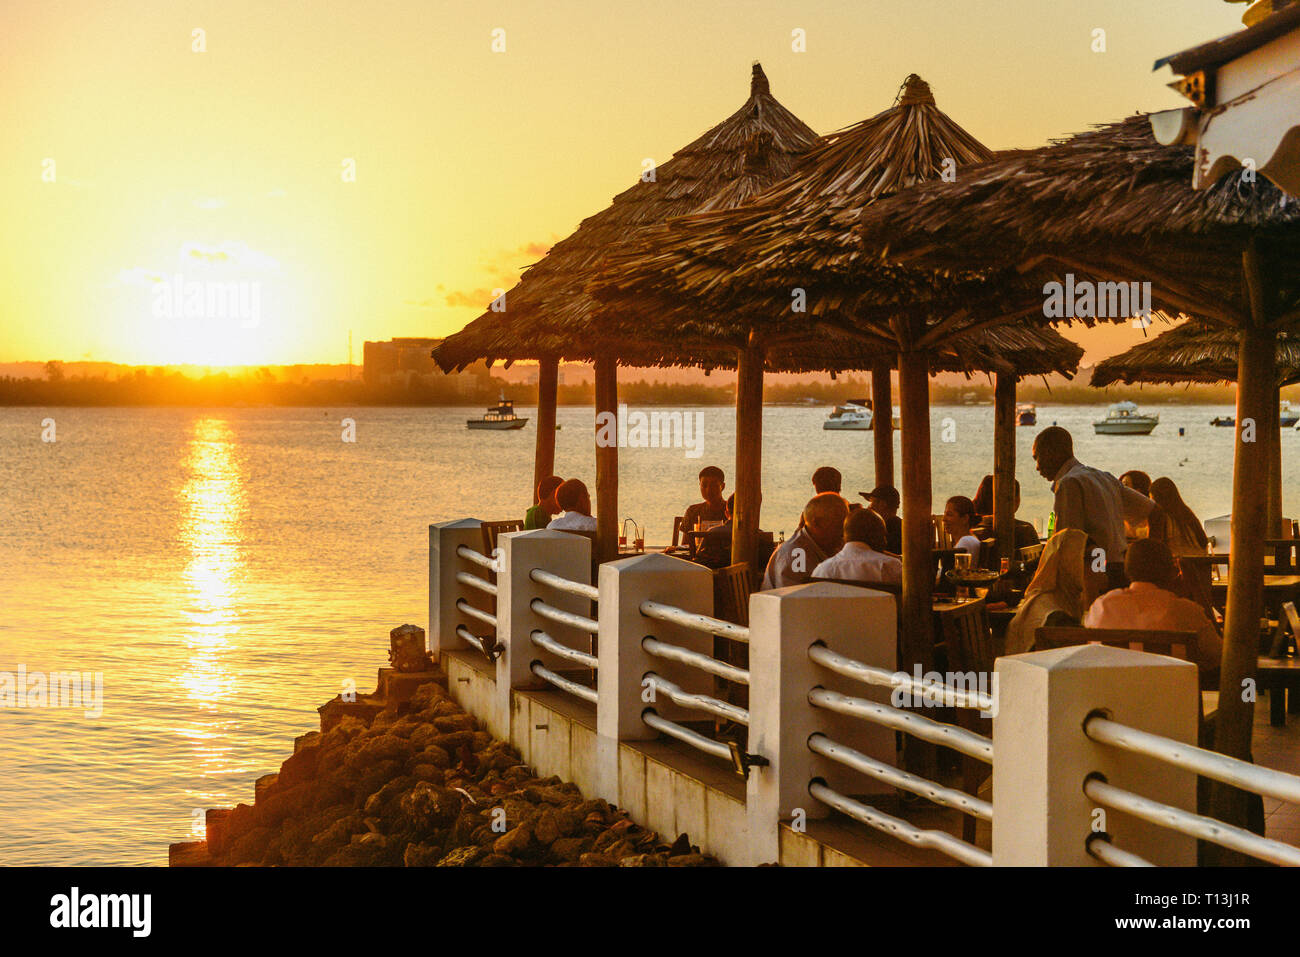 The setting sun backlights a beachside restaurant in Dar-es-Salaam, Tanzania. Palapa, or native reed umbrellas shelter the guests. Stock Photo